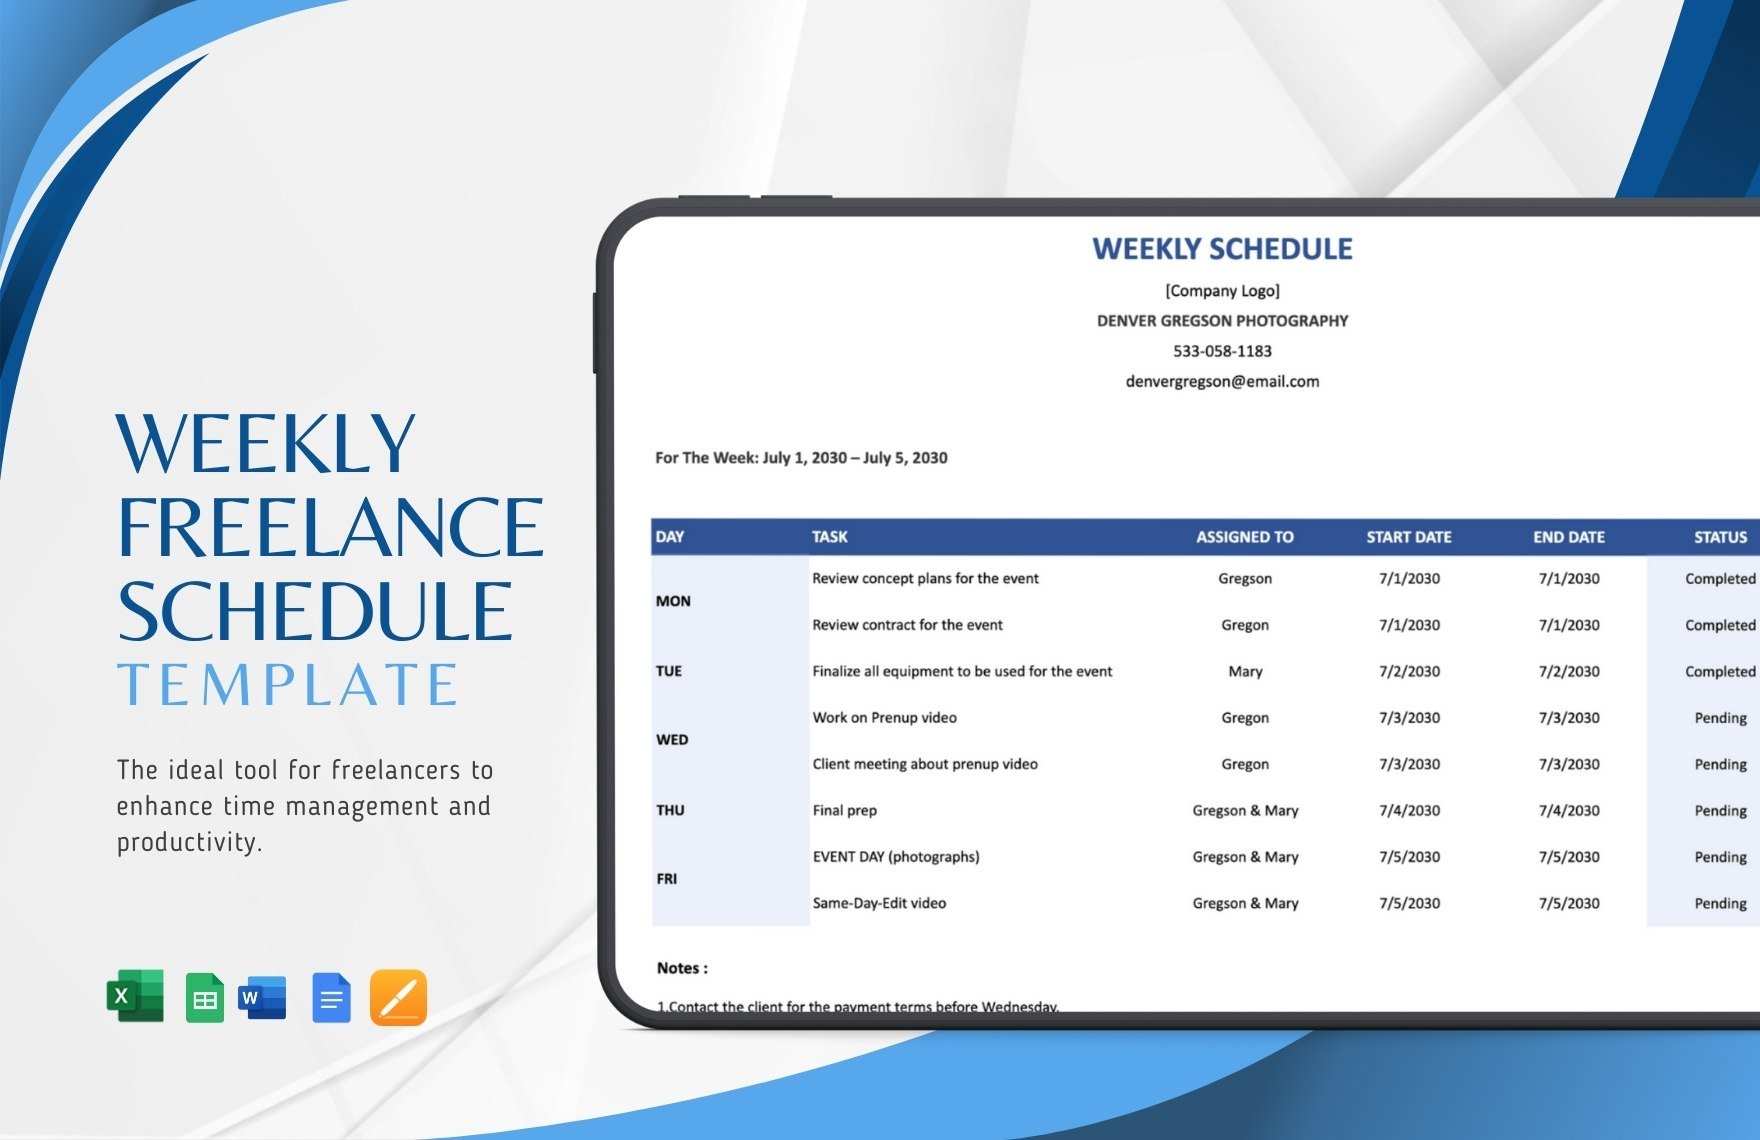 Weekly Freelance Schedule Template in Word, Google Docs, Excel, Google Sheets, Apple Pages